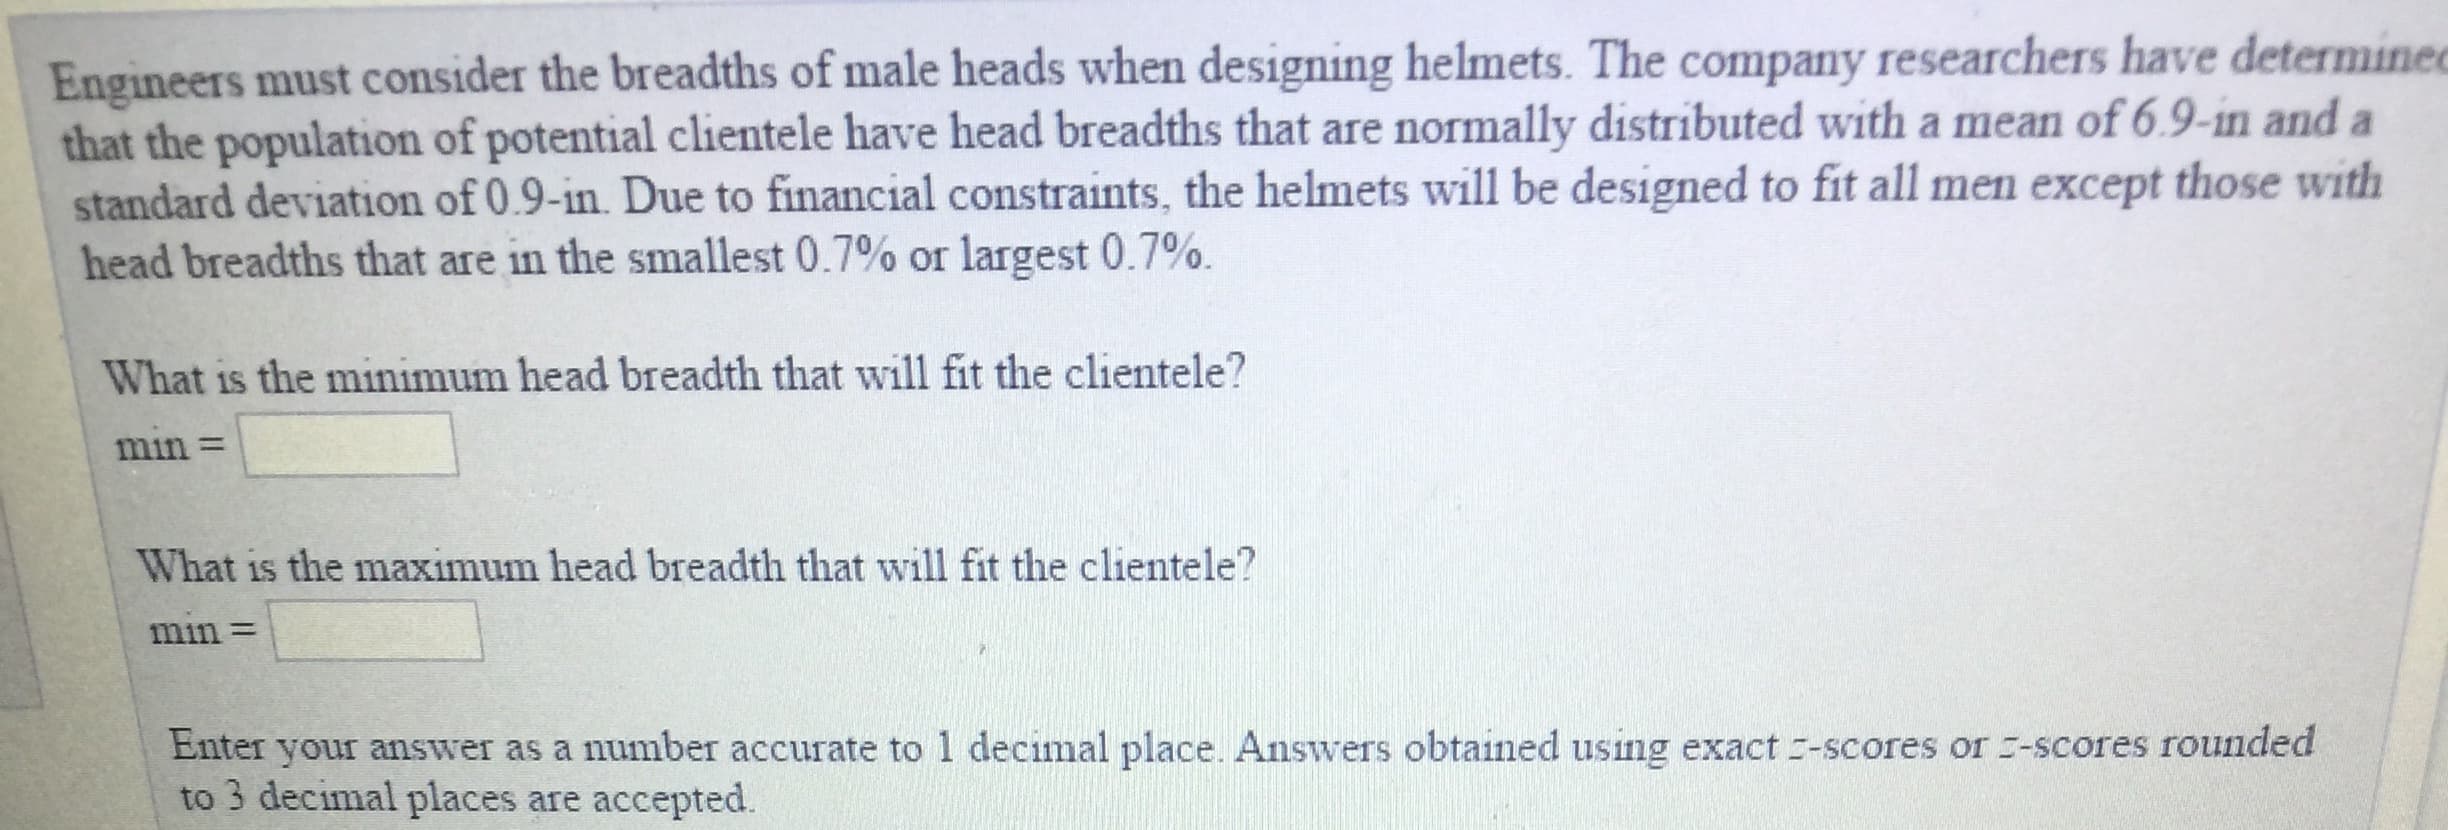 Engineers must consider the breadths of male heads when designing helmets. The company researchers have determines
that the population of potential clientele have head breadths that are normally distributed with a mean of 6.9-in and a
standard deviation of 0.9-in. Due to financial constraints, the helmets will be designed to fit all men except those with
head breadths that are in the smallest 0.7% or largest 0.7%.
What is the minimum head breadth that will fit the clientele?
min-
What is the maximum head breadth that will fit the clientele?
min
Enter your answer as a number accurate to 1 decimal place. Answers obtained using exact :-scores or -scores rounded
to 3 decimal places are accepted.
